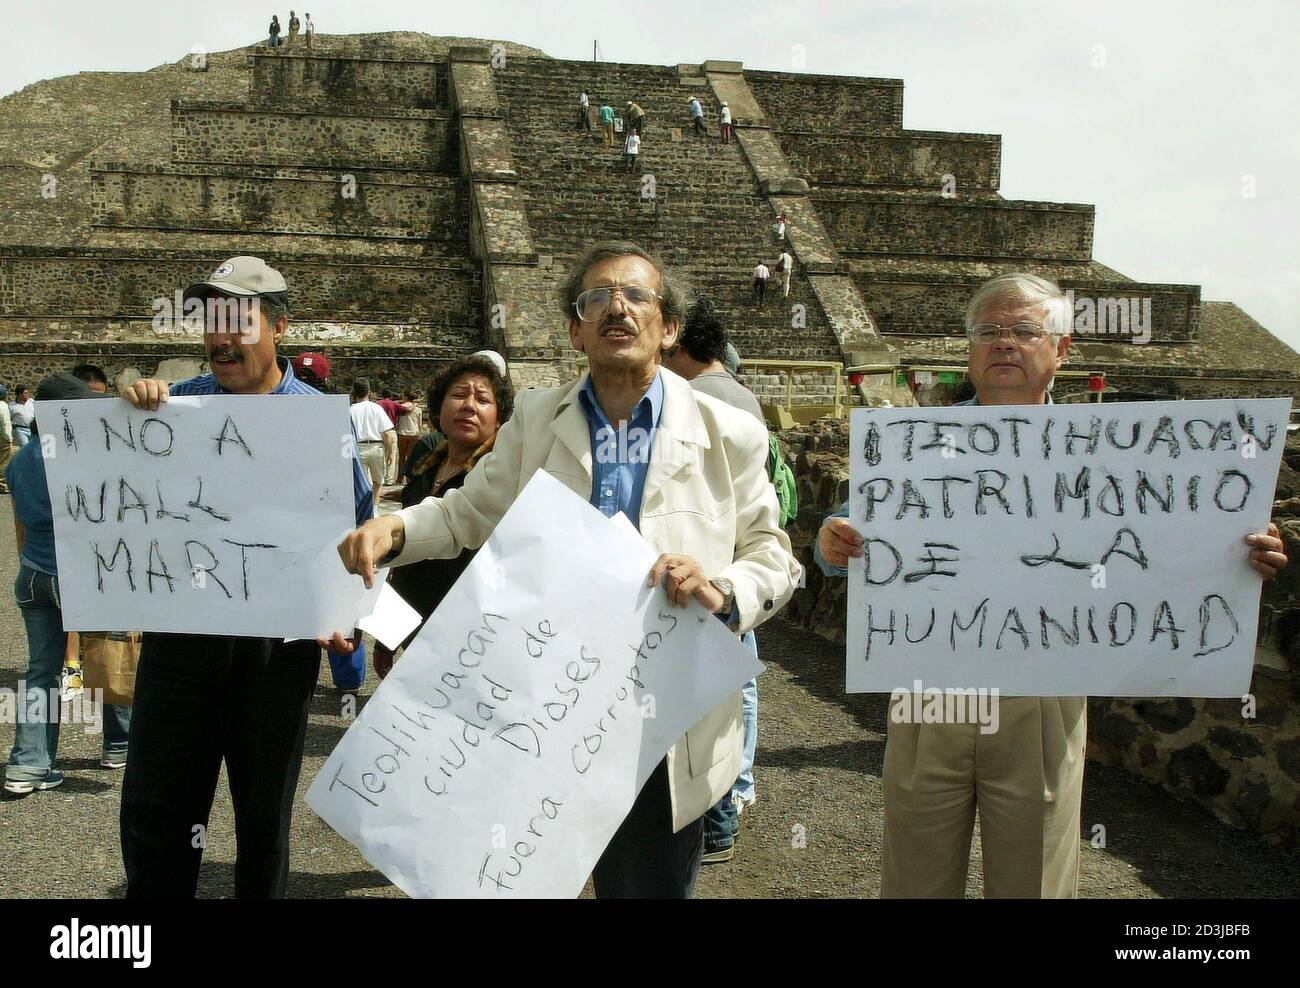 Mexican demonstrators protest against the construction of a Wal-Mart market, in front of the moon pyramid at Mexico's Teotihuacan archeological ruins on September 18, 2004. In the shadow of colossal pyramids left by a great Mexican civilization, a Wal-Mart rises, and some locals have gone to court to overturn its approval. Local activists are fighting the warehouse style store, saying it threatens the ruins and will destroy local commerce and a way of life that dates back centuries. REUTERS/Daniel Aguilar  DA Stock Photo